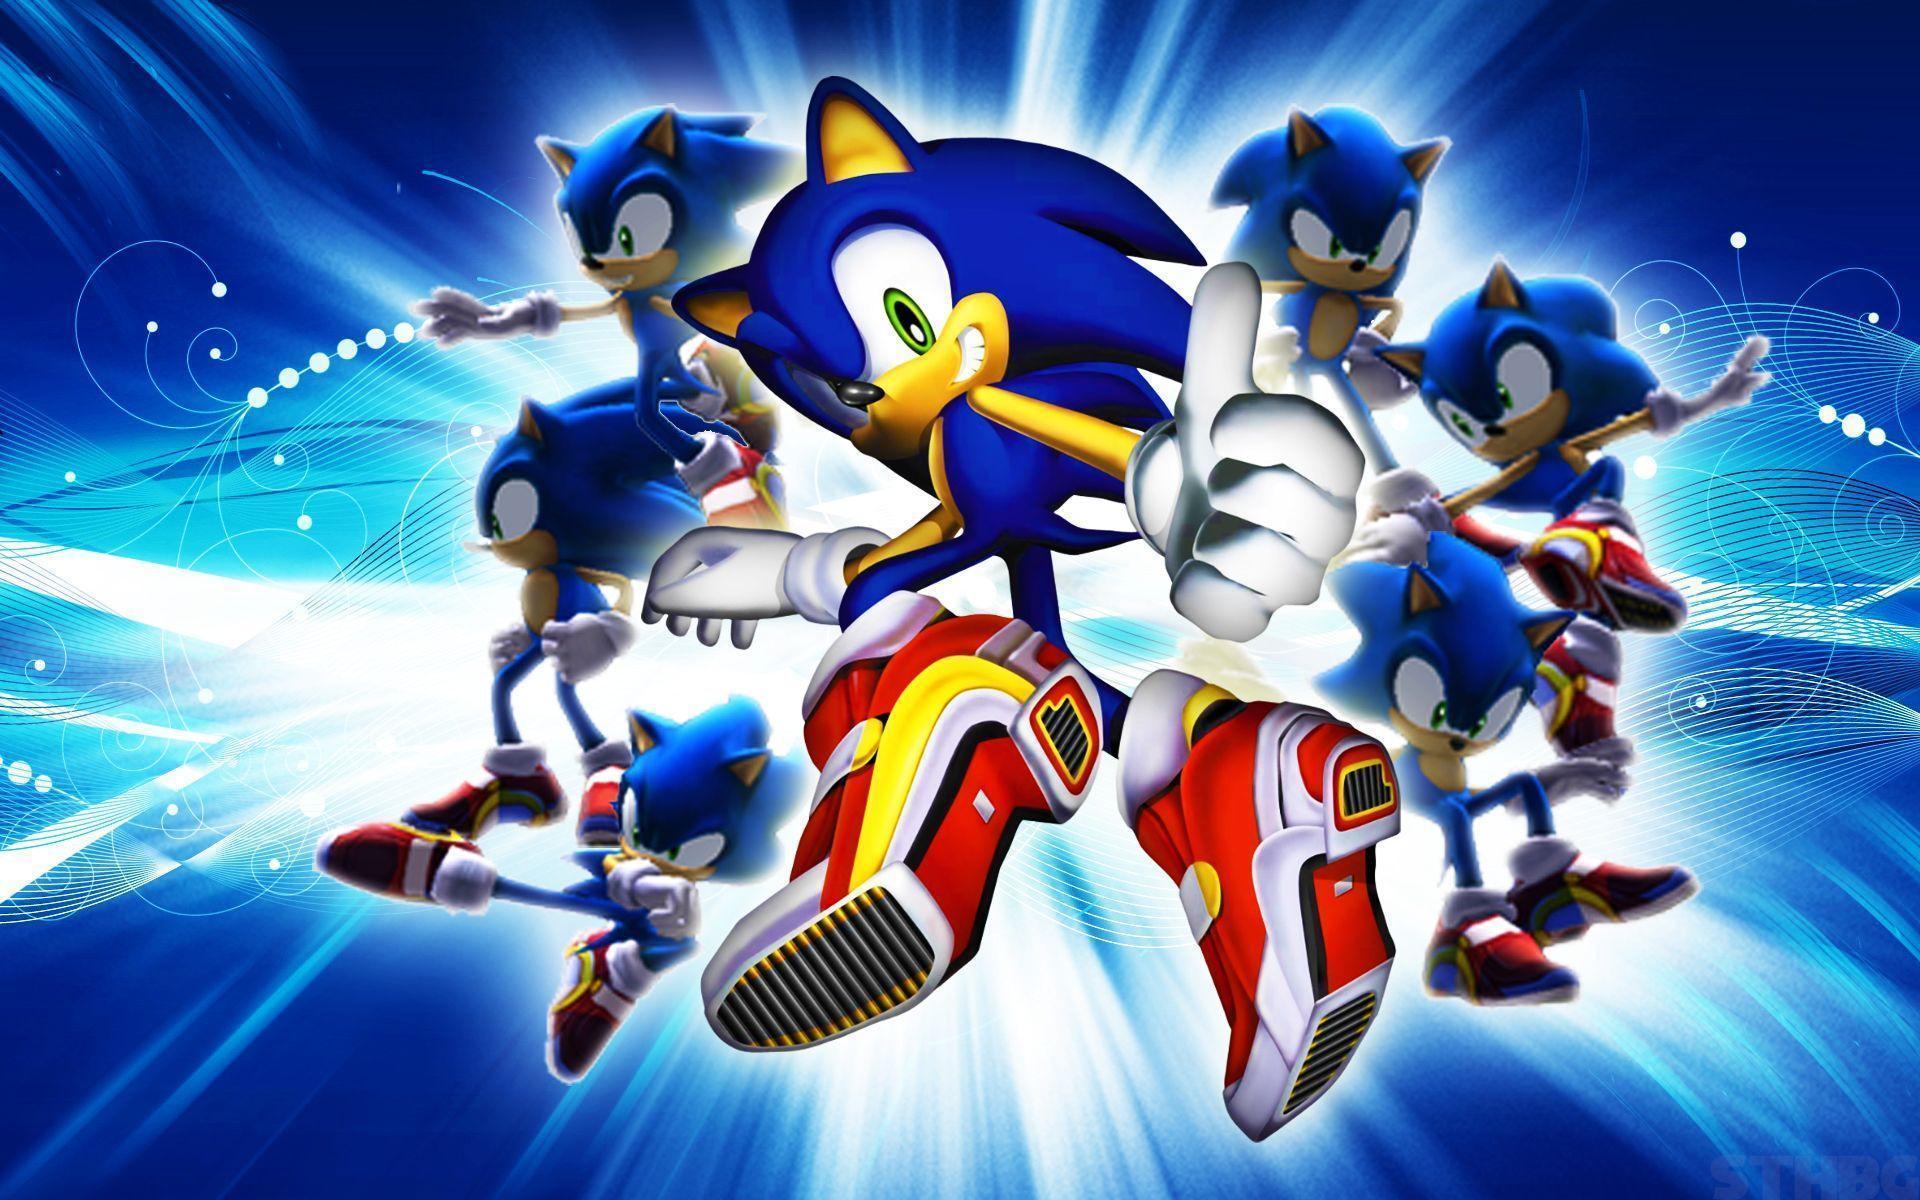 sonic the hedgehog 2 download pc